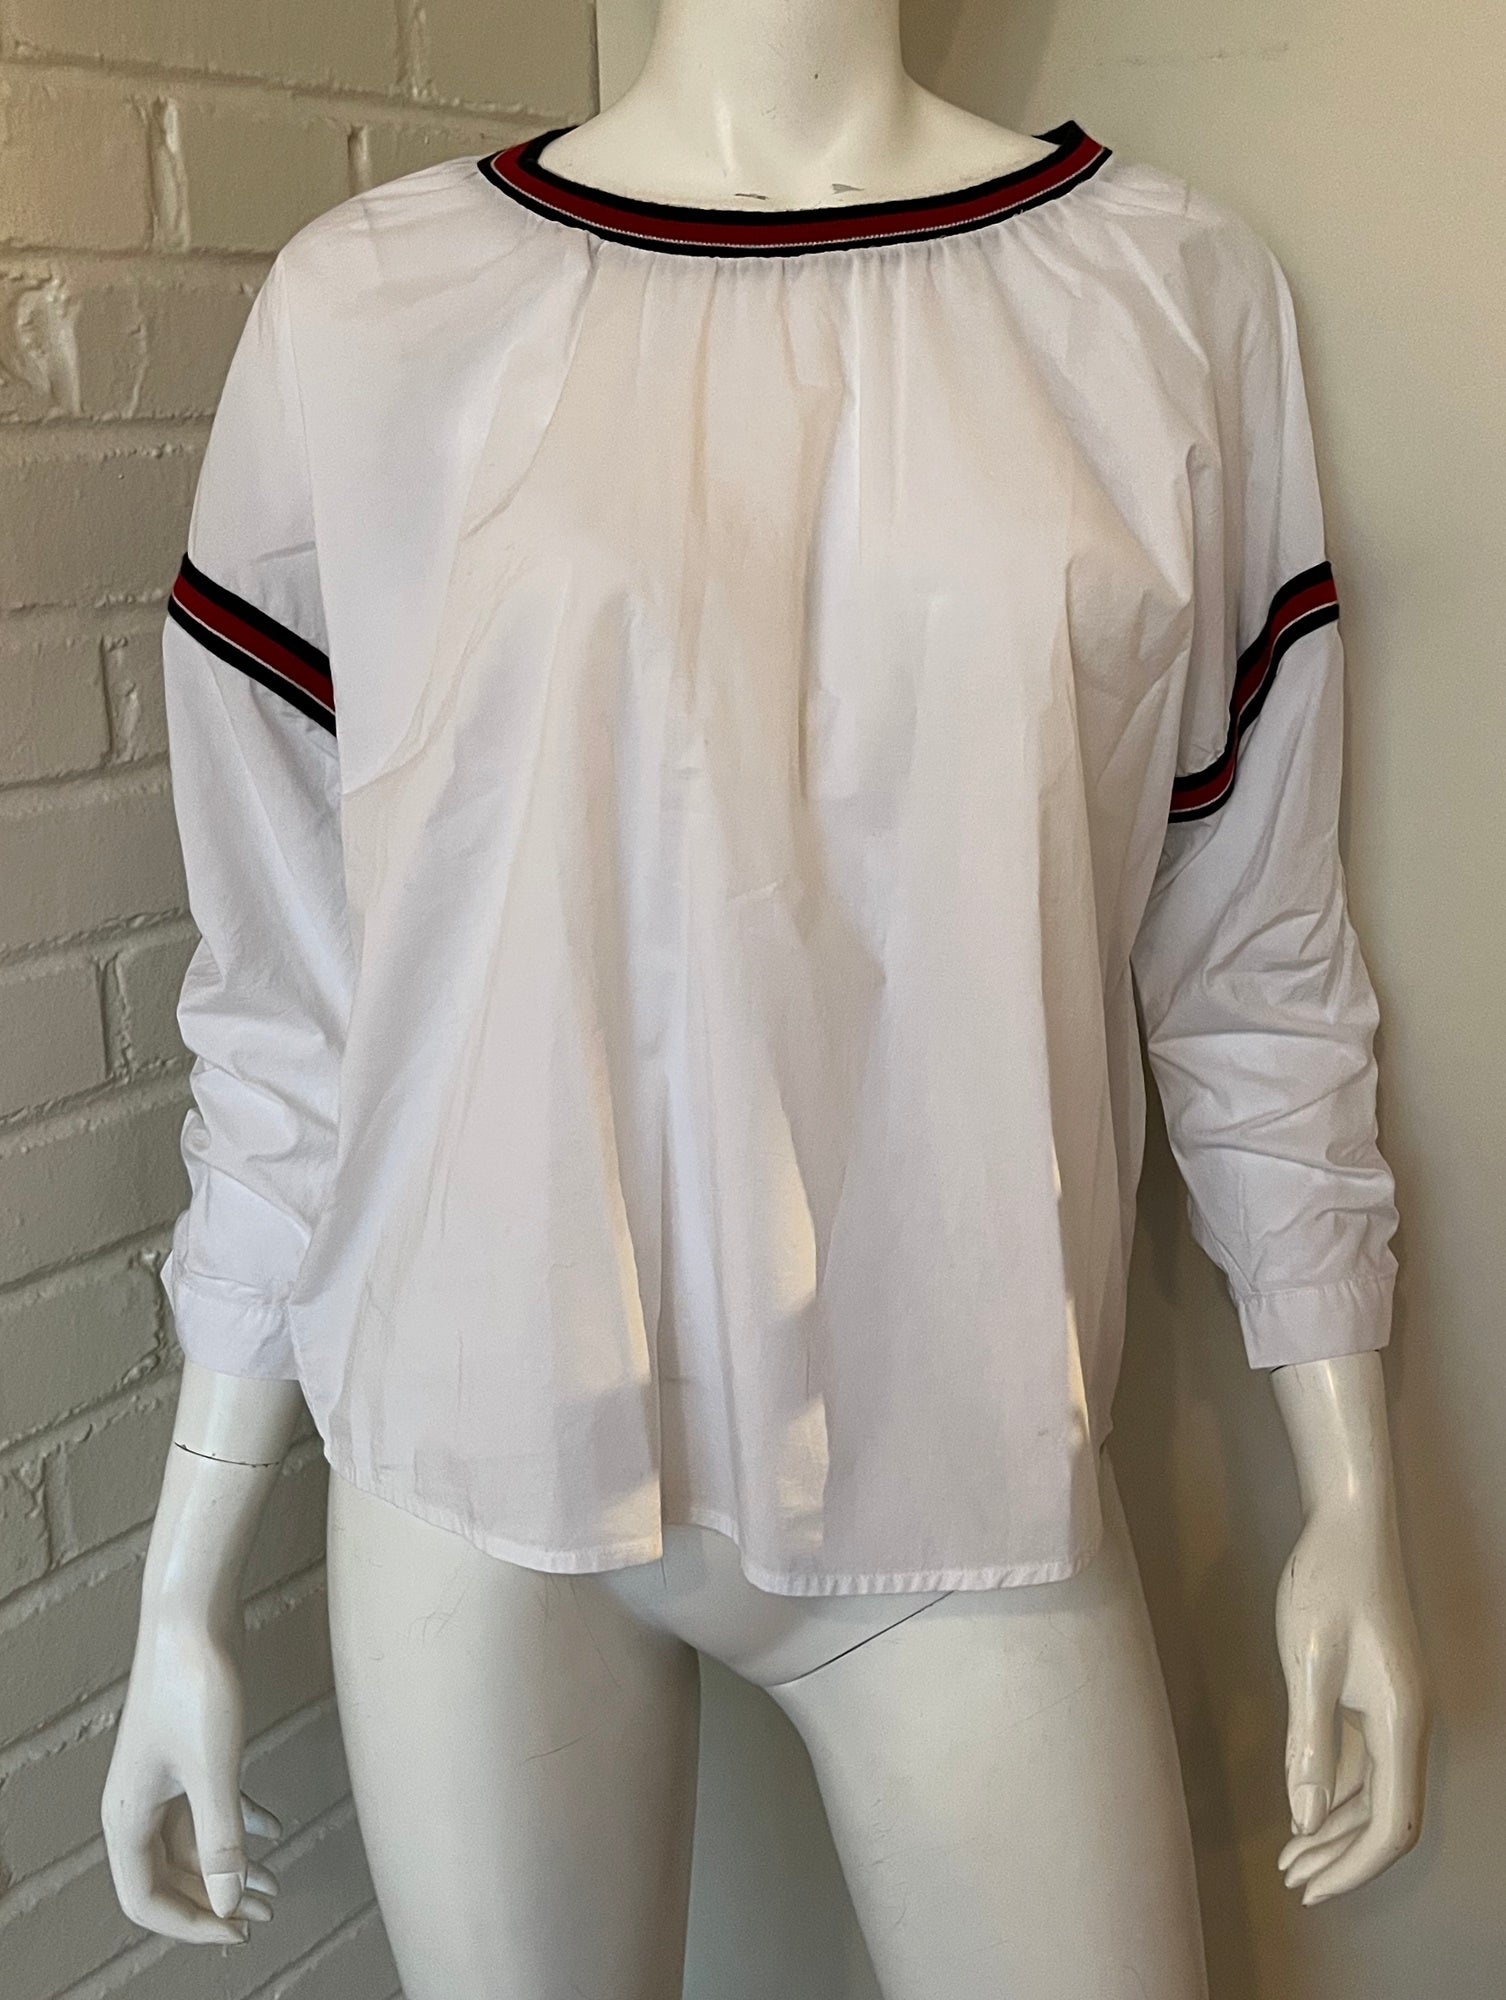 Long Sleeve Cotton Top Size Small